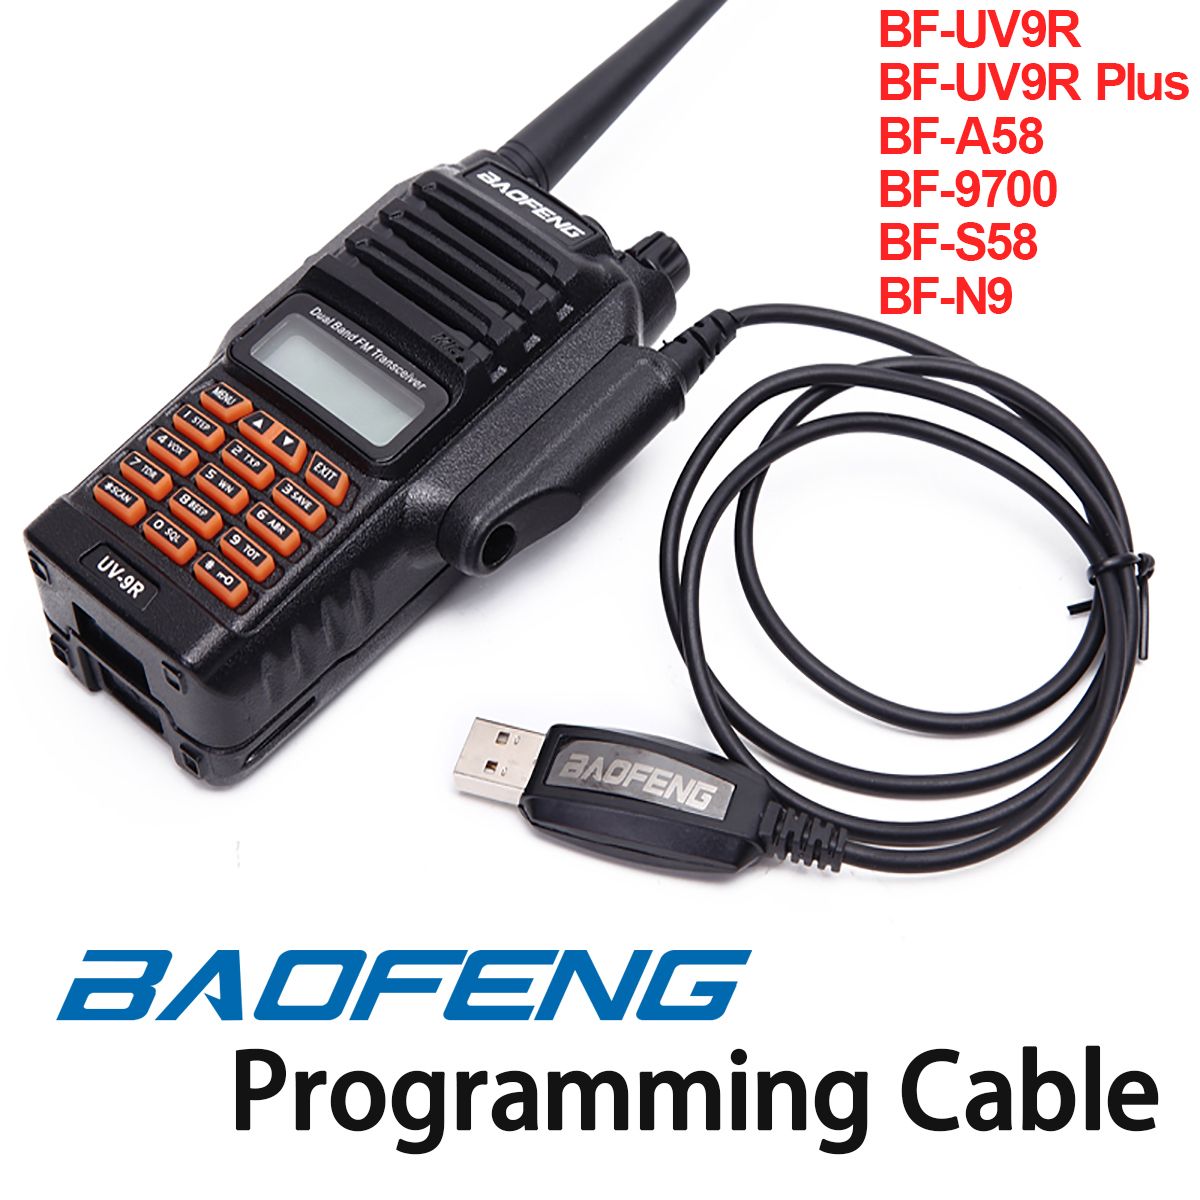 BAOFENG-Two-Way-Walkie-Talkie-USB-Programming-Cable-CD-Firmware-For-Plus-Radio-BF-UV9R-BF-A58-BF-970-1439373